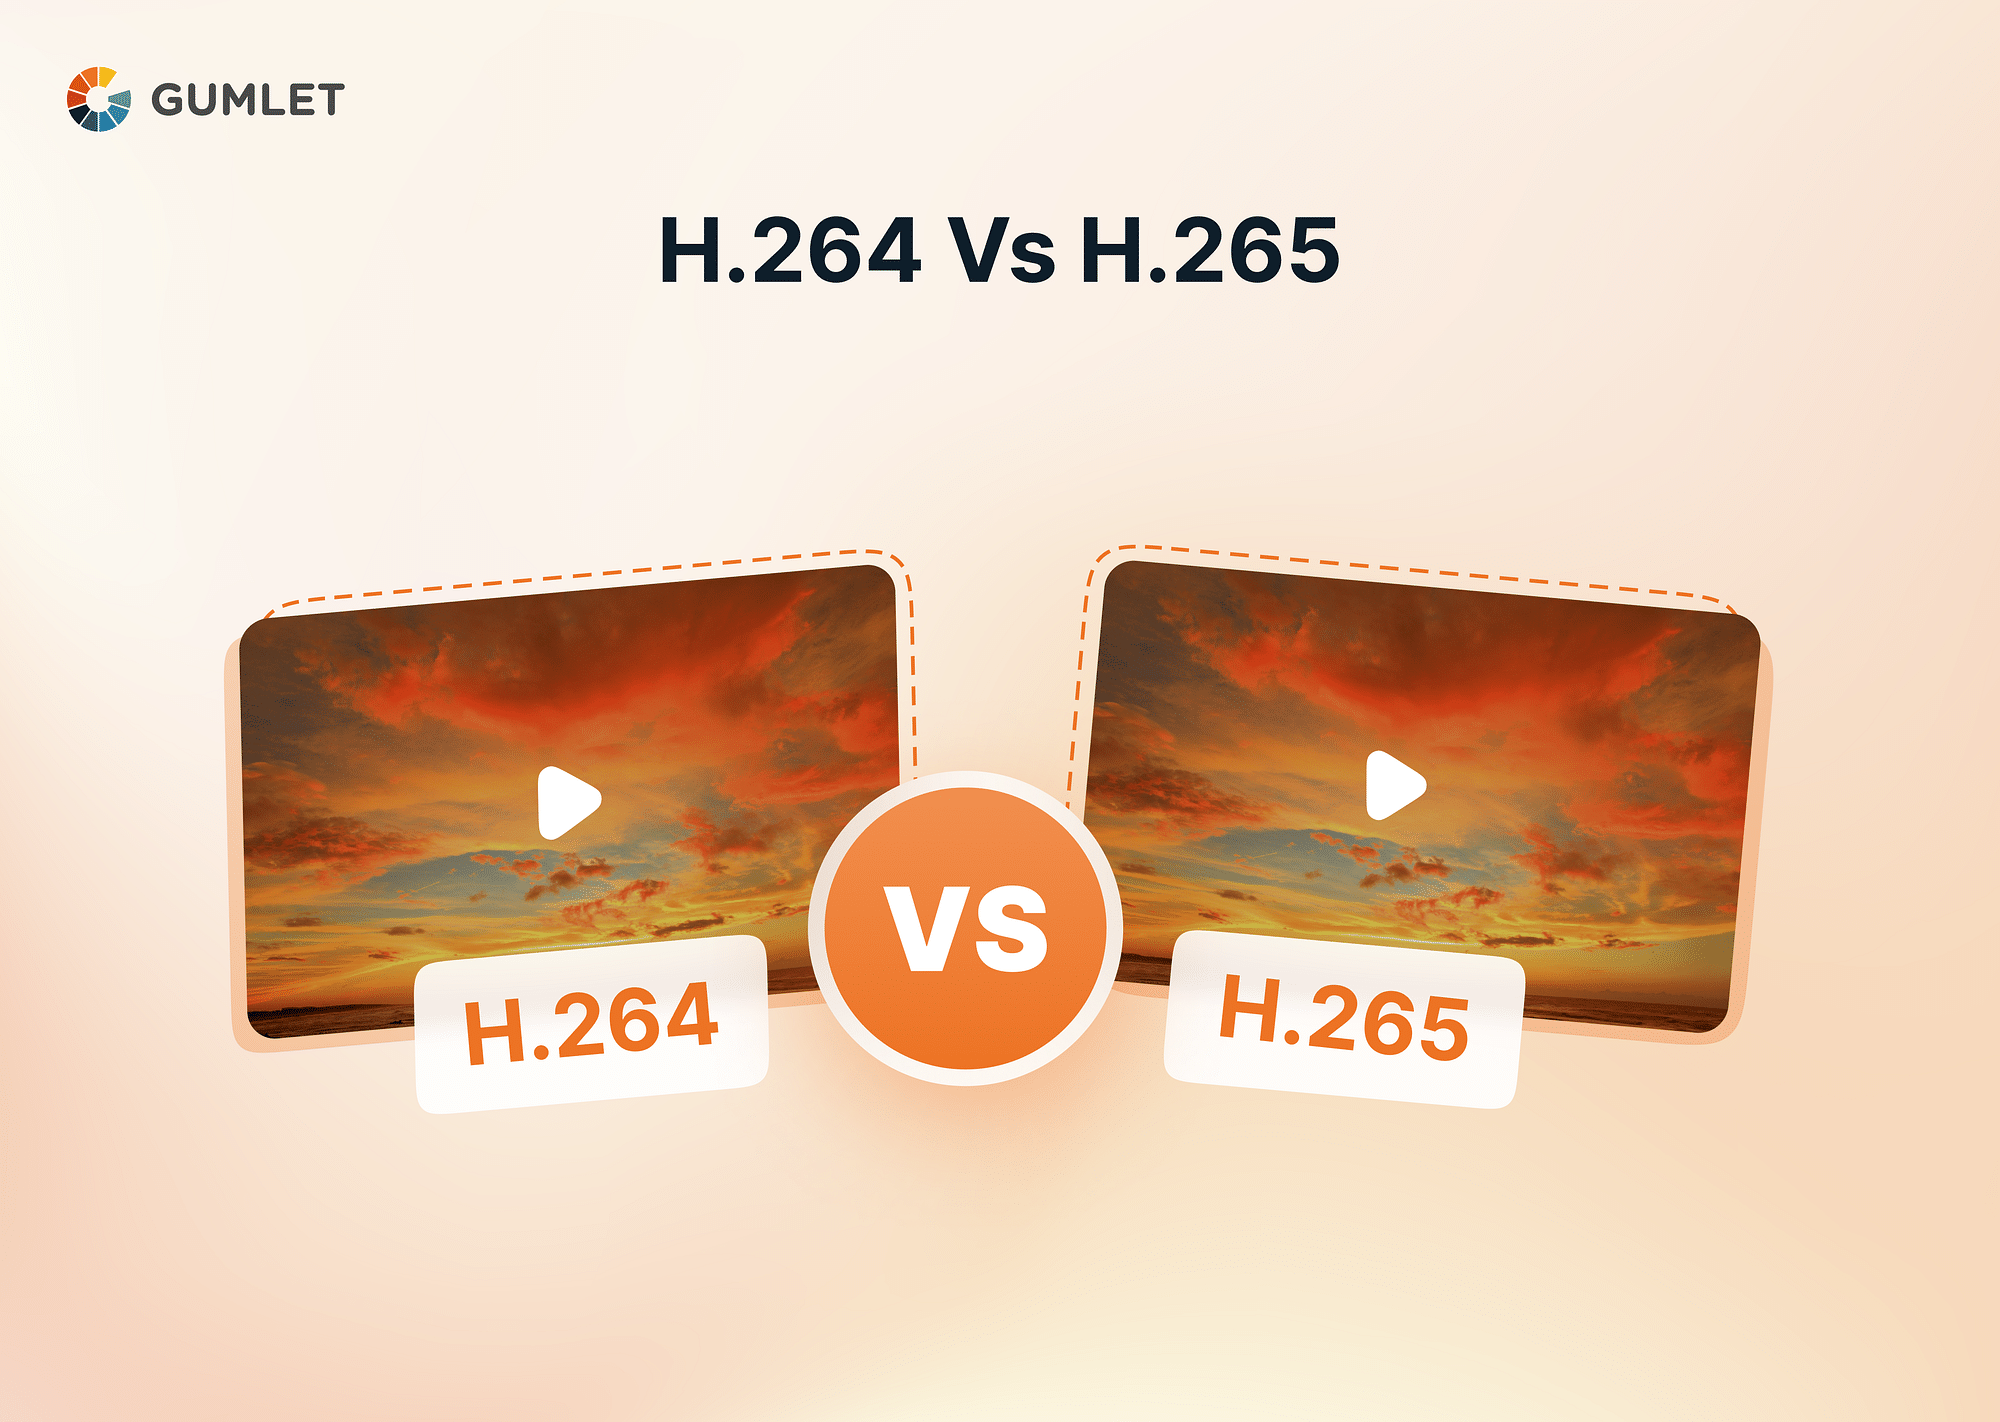 H.264 vs H.265: Which video codec should you choose?